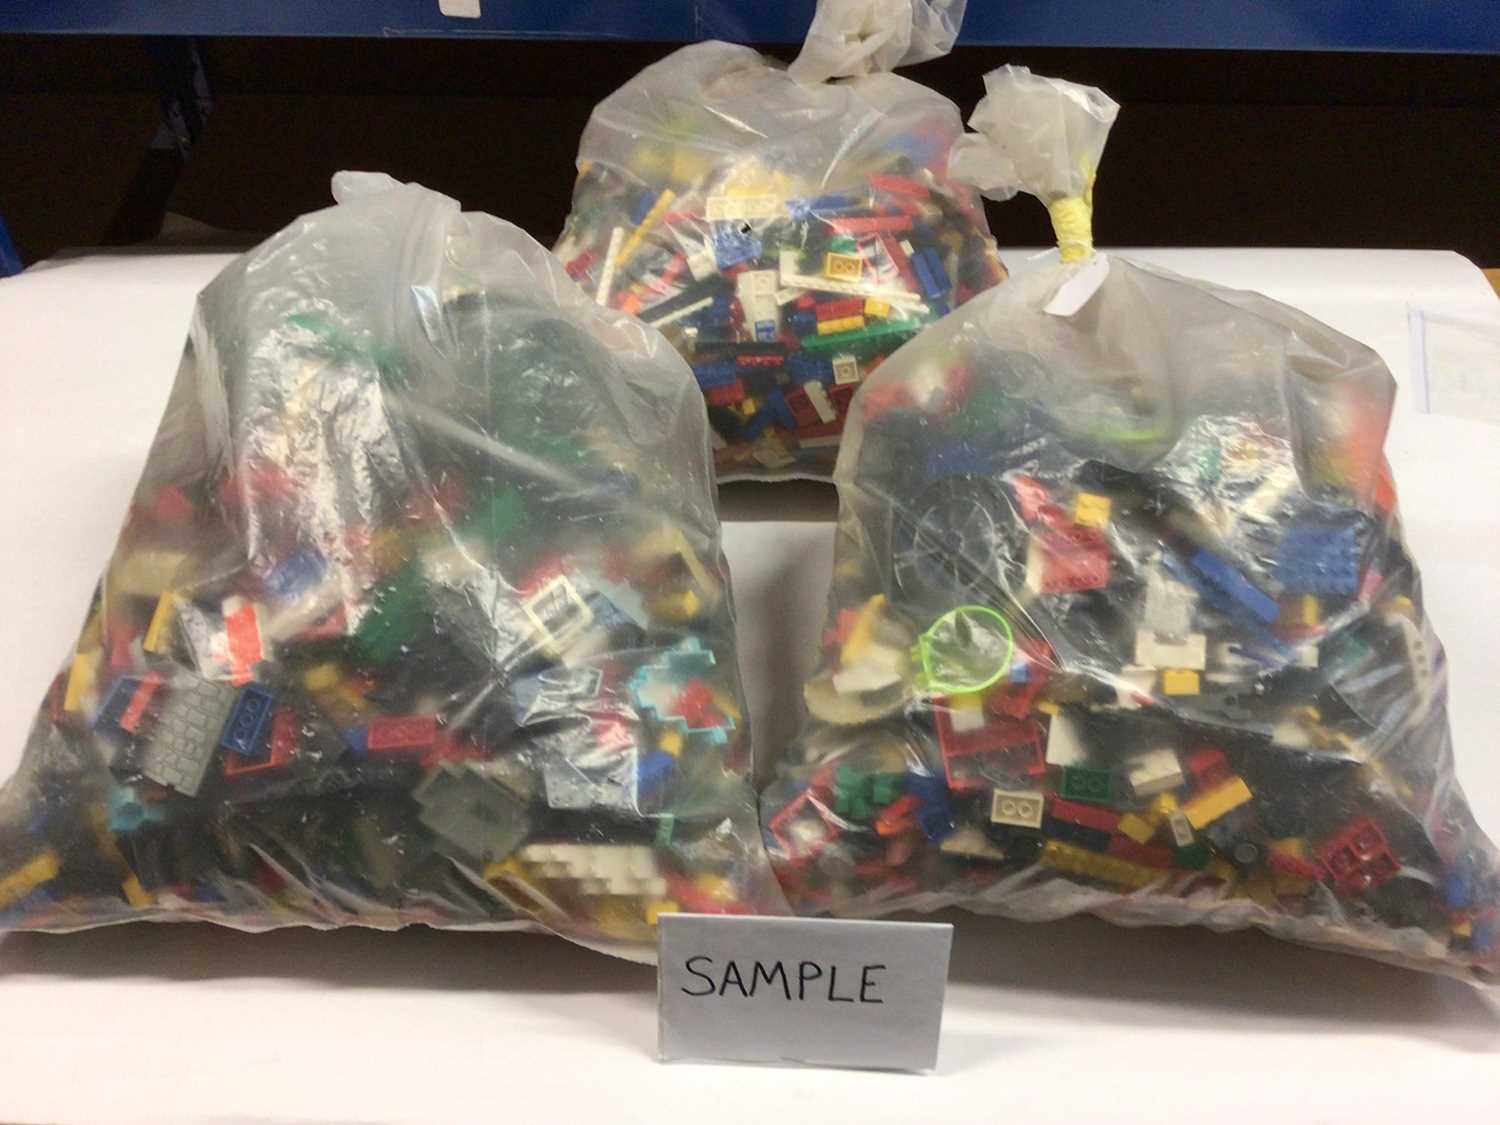 Lot 96 - Three bags of assorted mixed Lego bricks and accessories, weighing approx 15 Kg in total